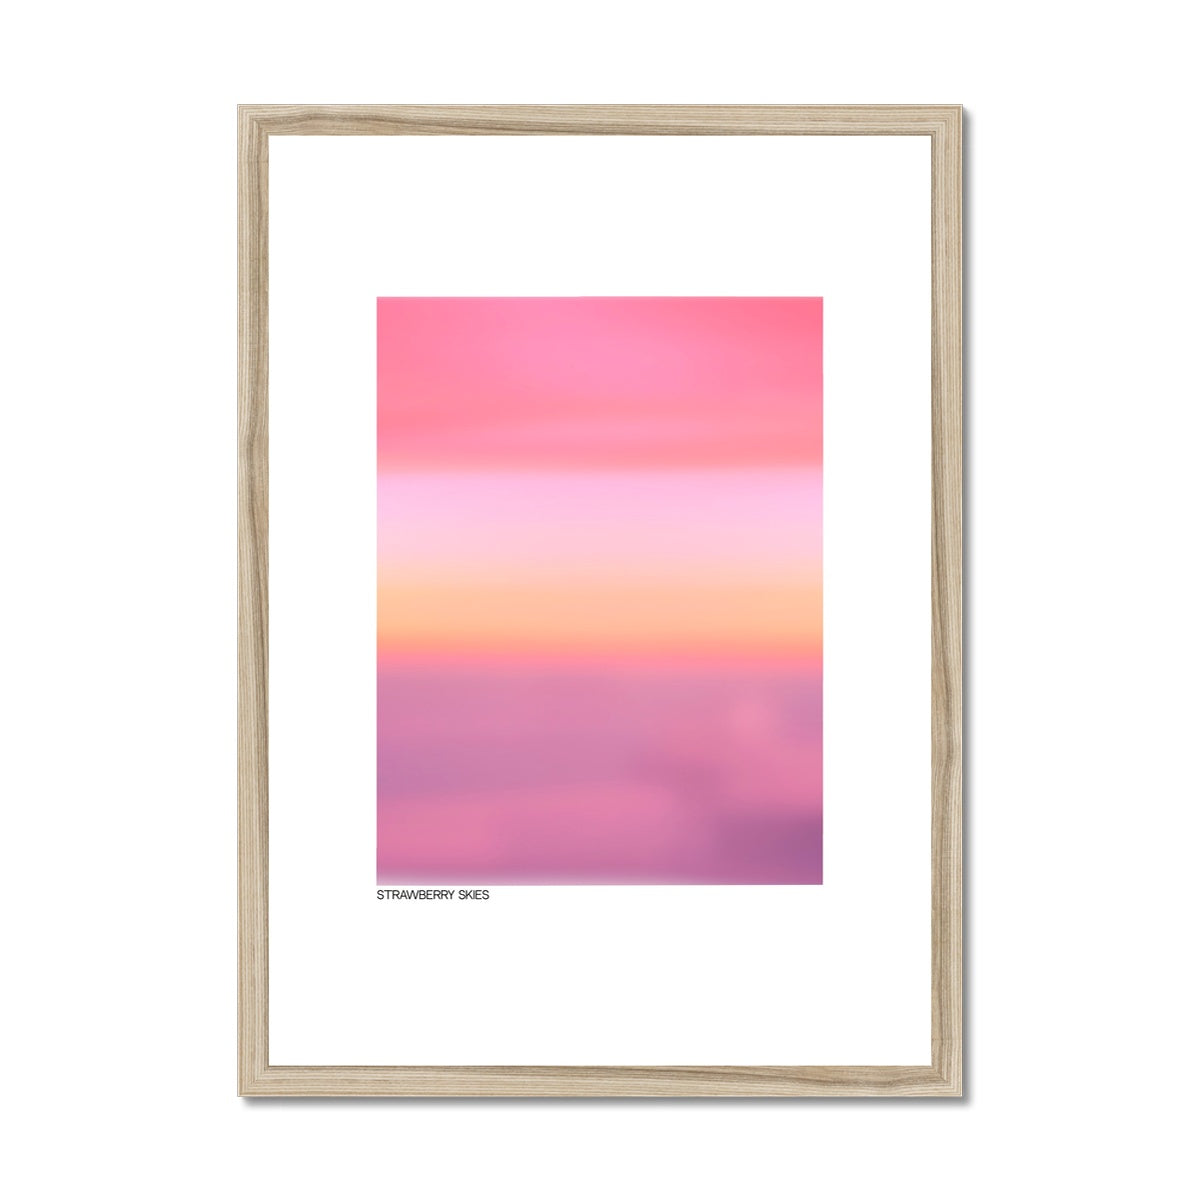 strawberry skies Framed & Mounted Print